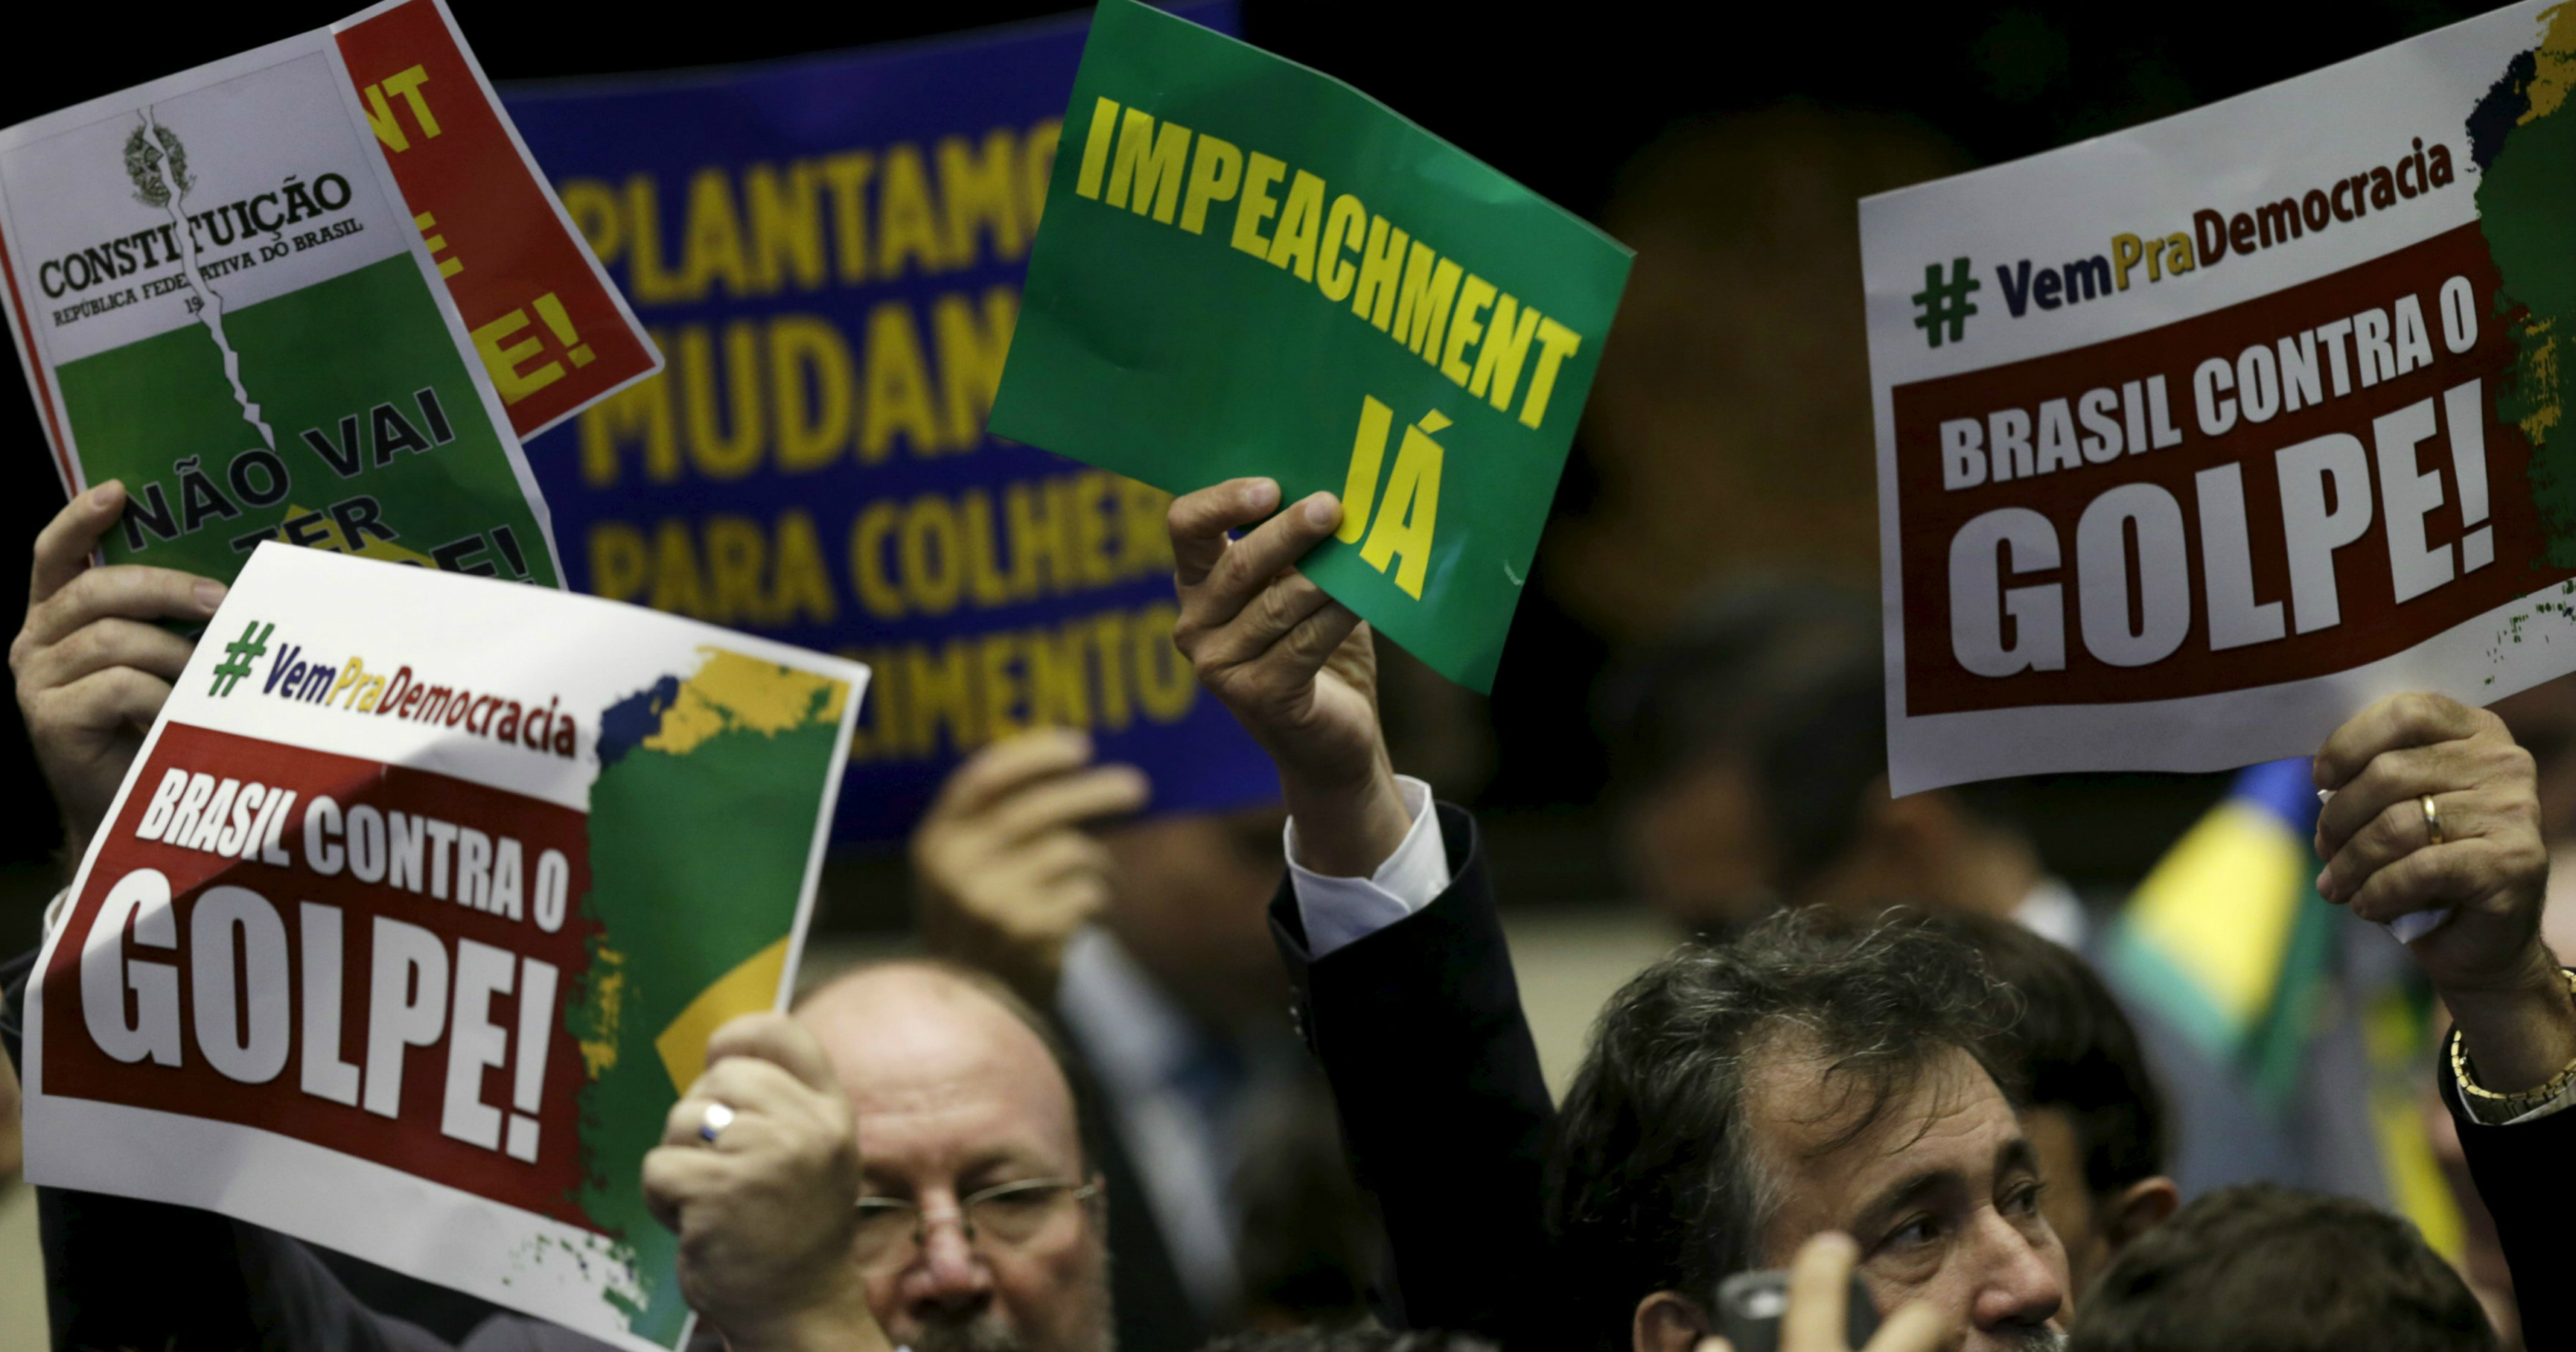 Congressmen demonstrate before a session to discuss Brazilian President Dilma Rousseff's impeachment